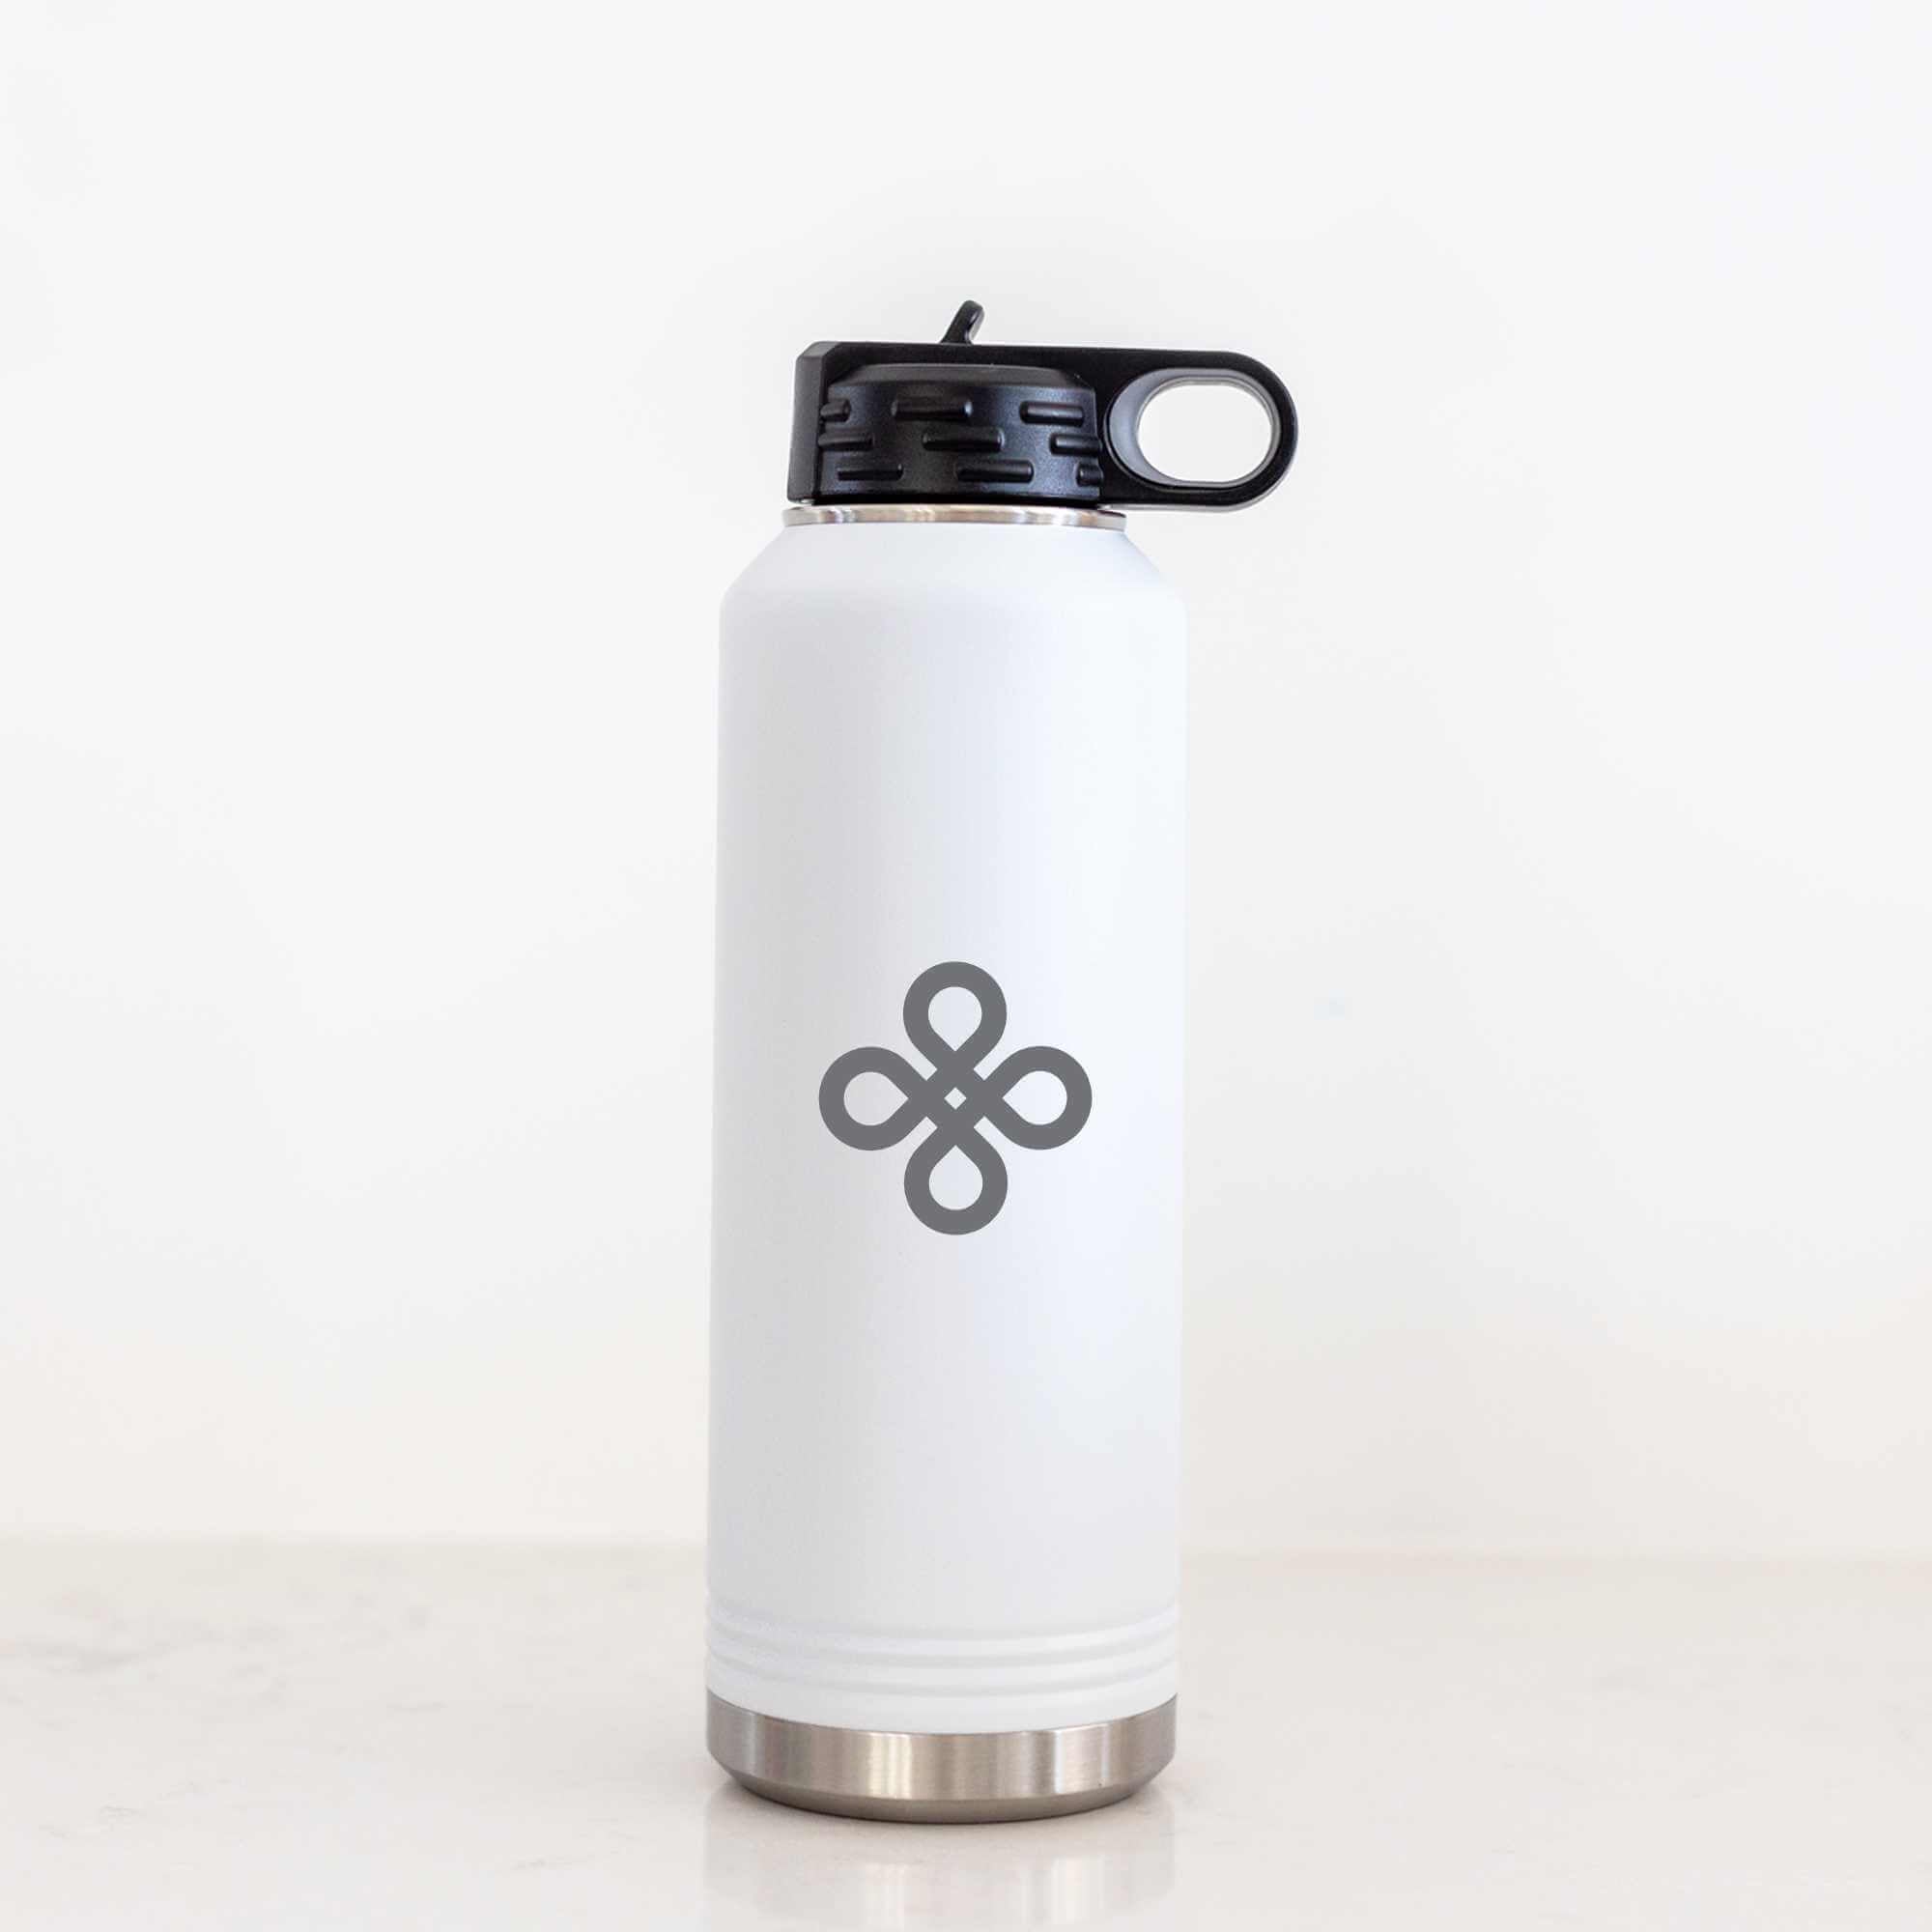 40 oz Insulated Steel Water Bottle with Business Logo